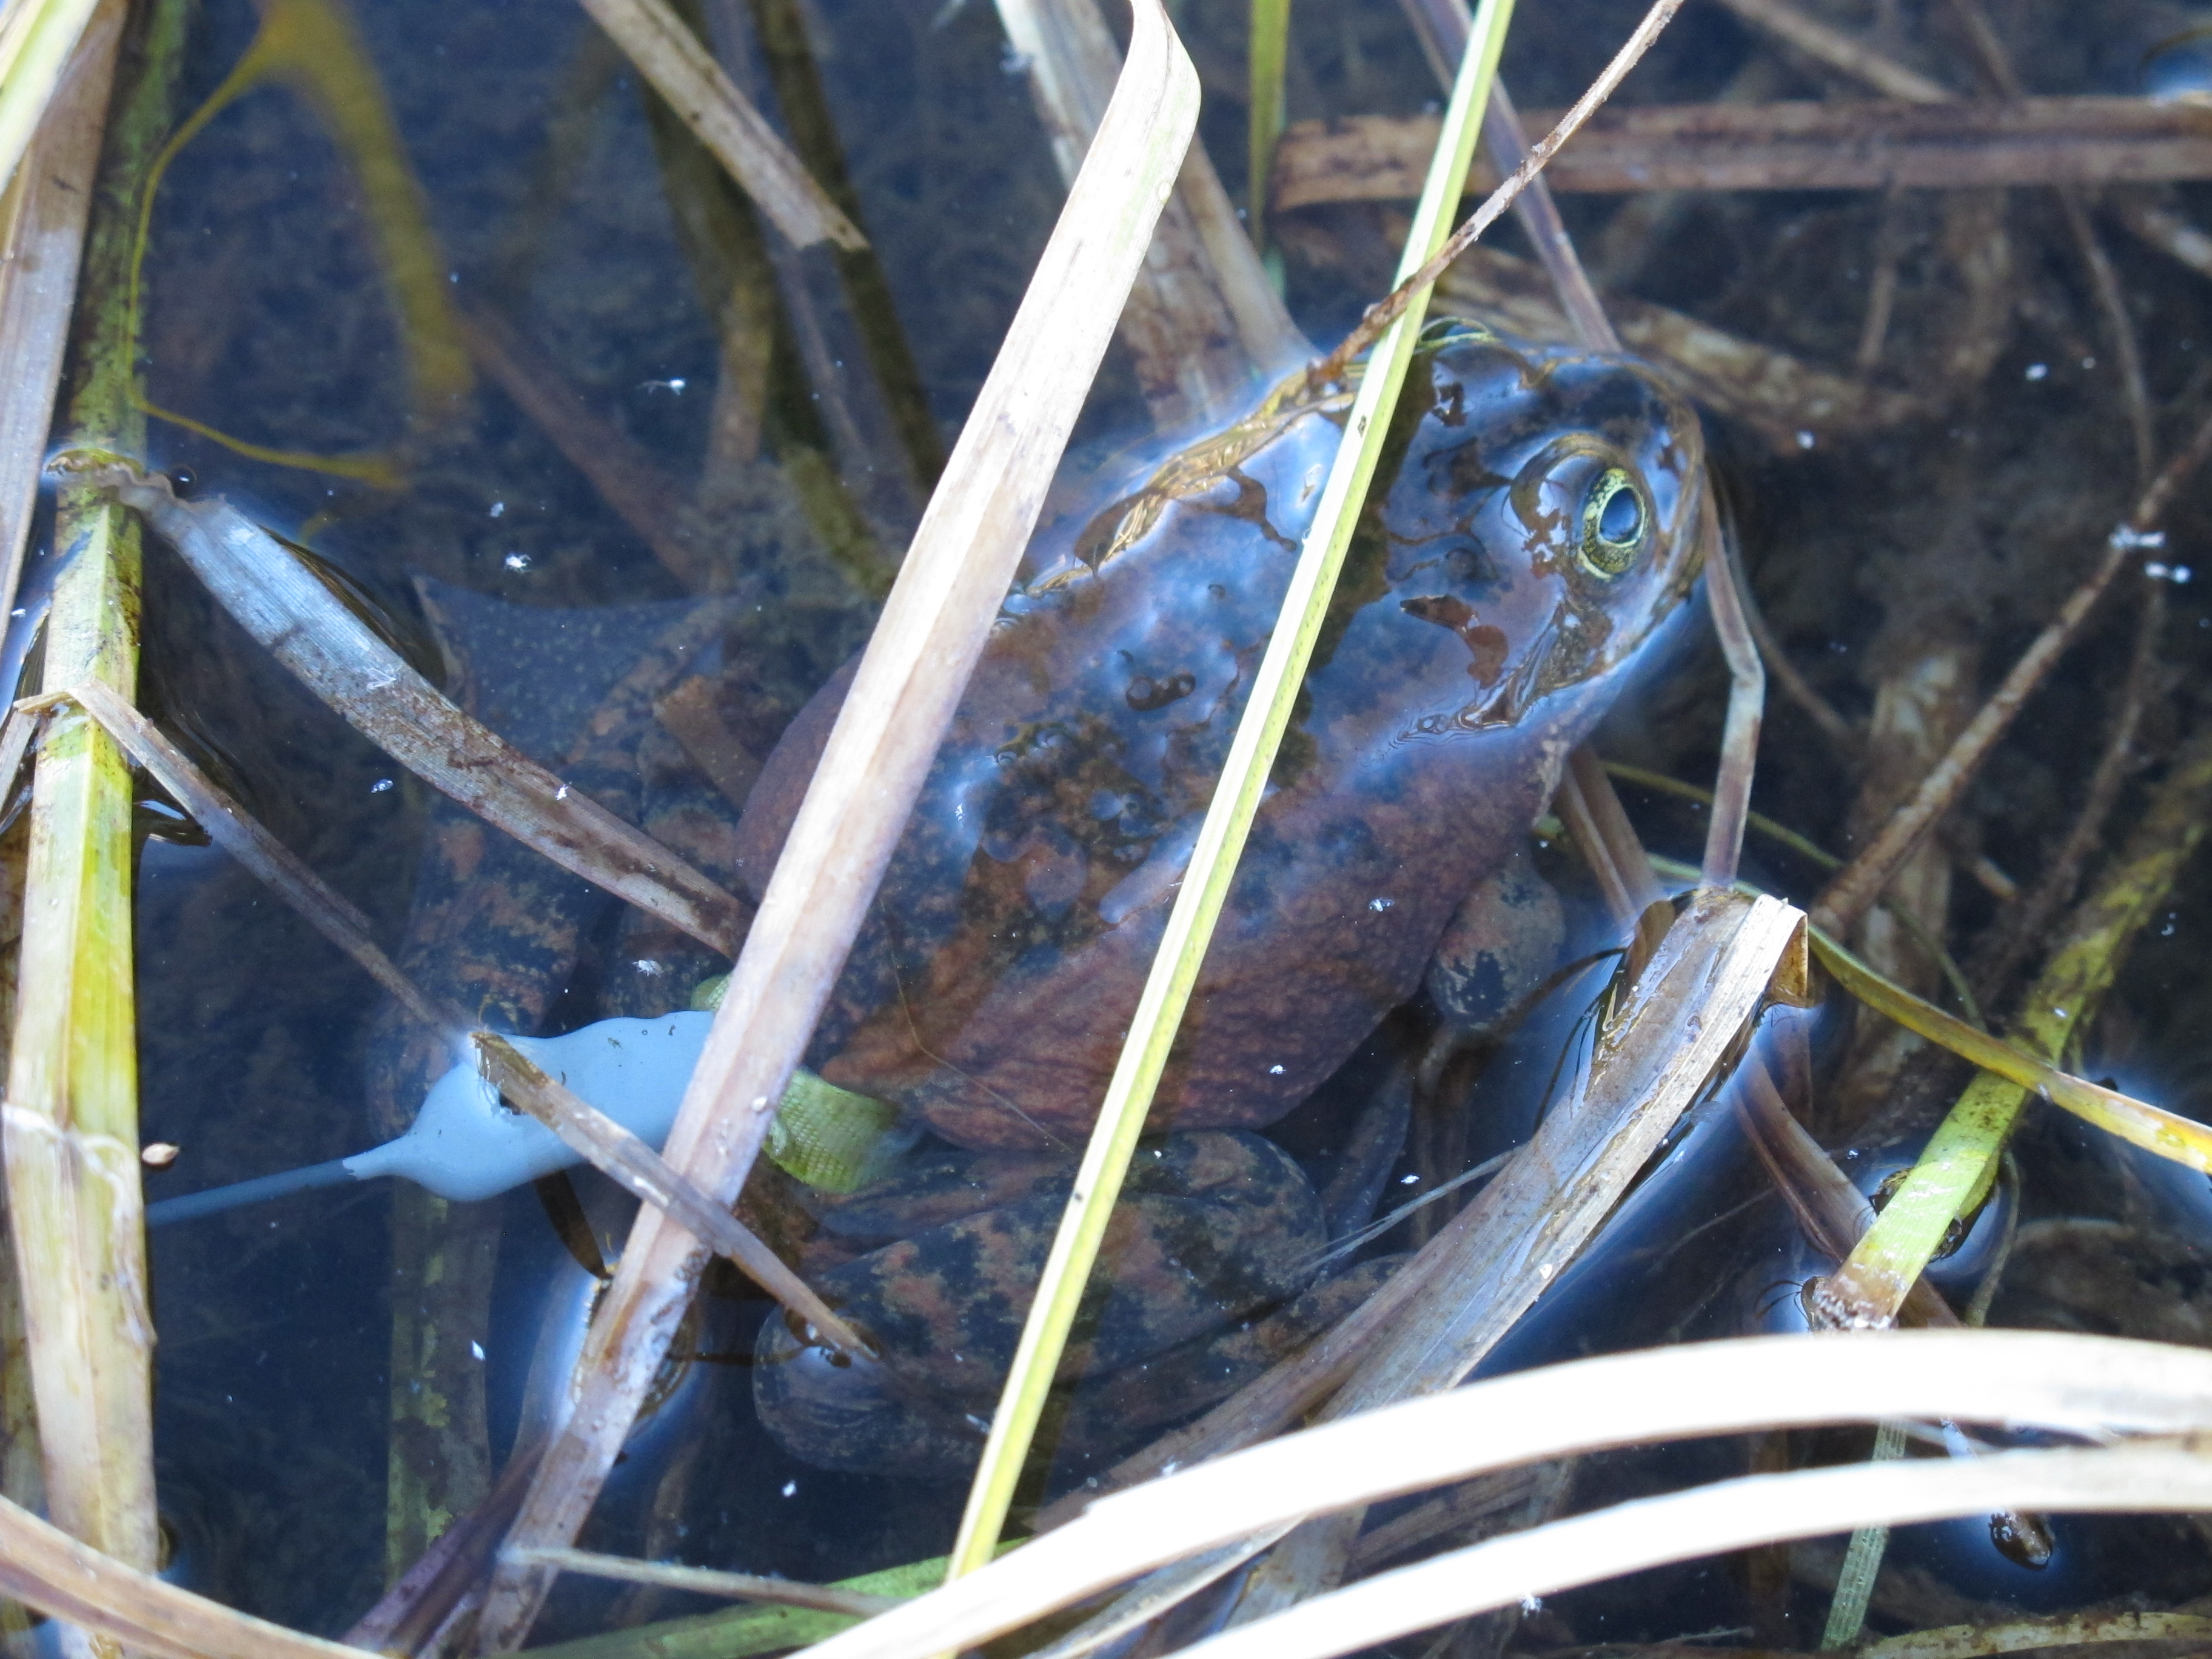 Oregon spotted frog with radio transmitter.<br />Photo by: Brome McCreary